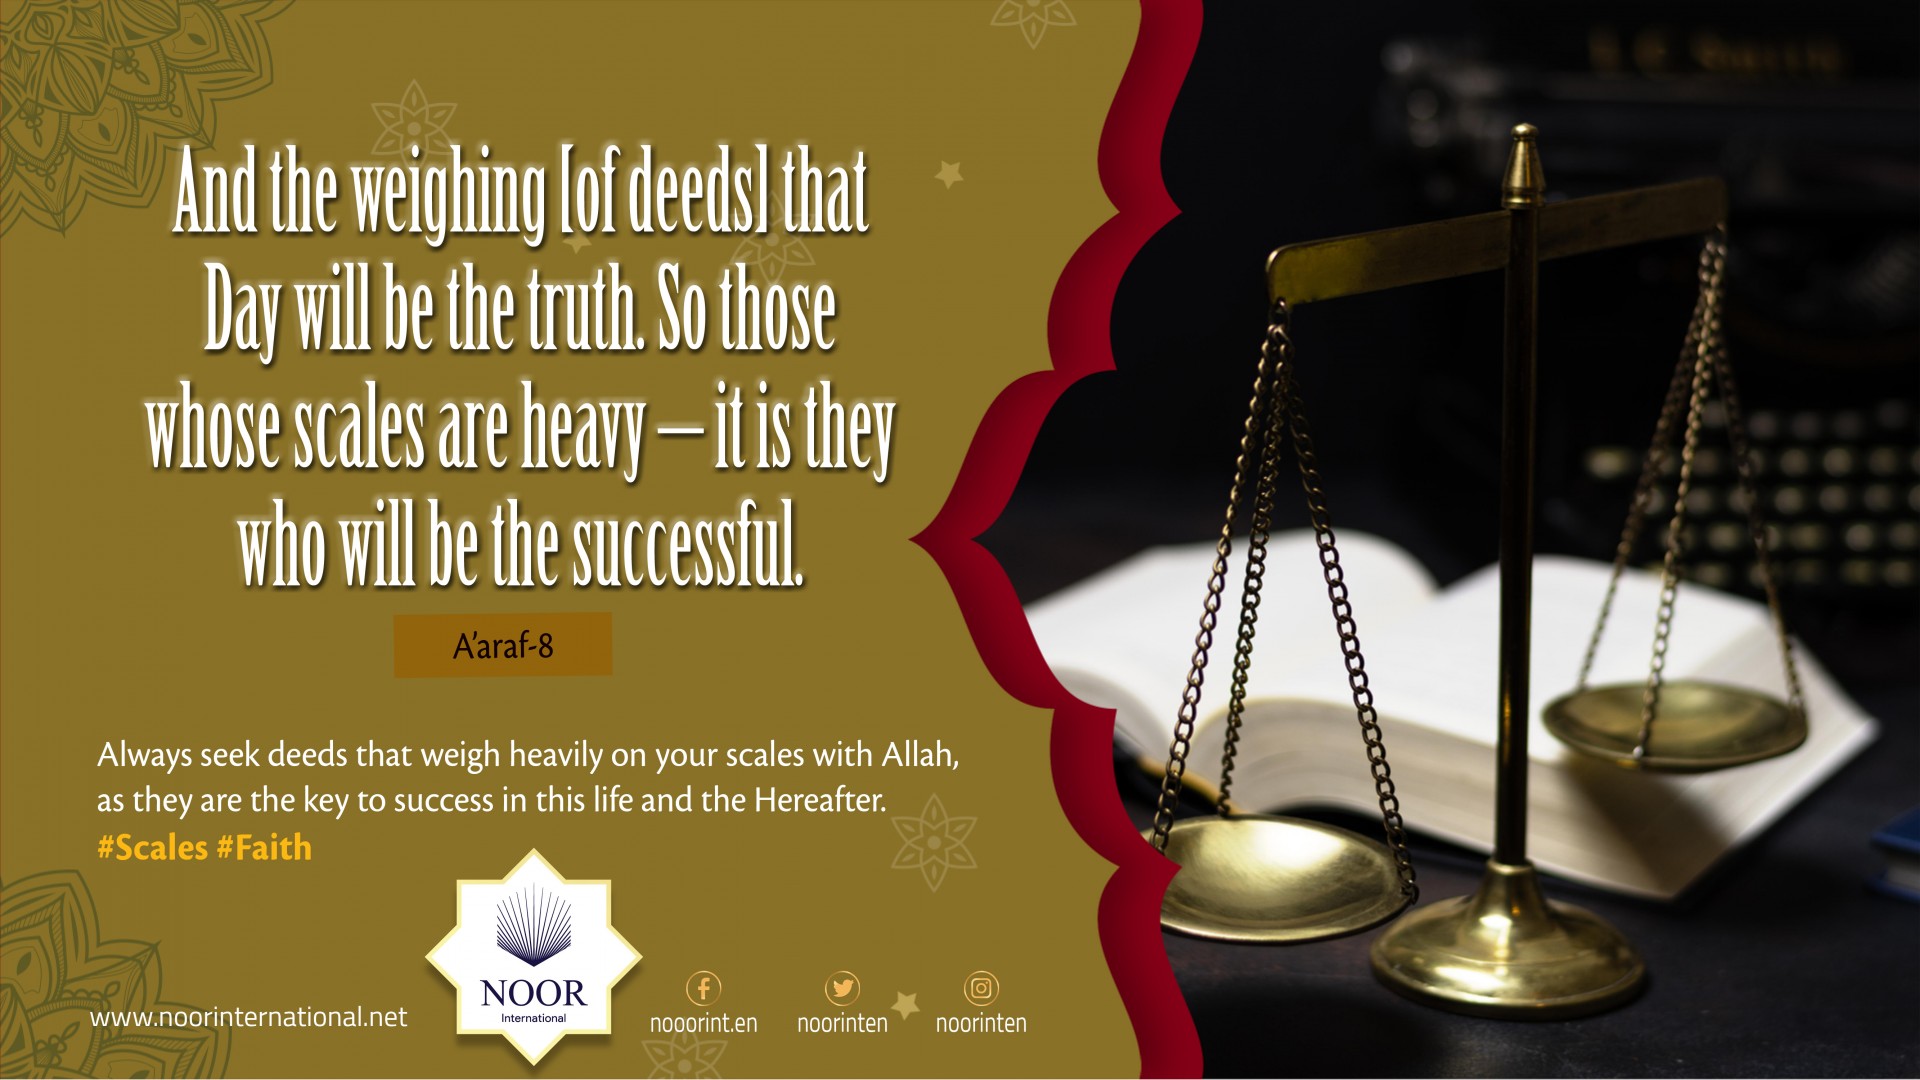 "Always seek deeds that weigh heavily on your scales with Allah,.."